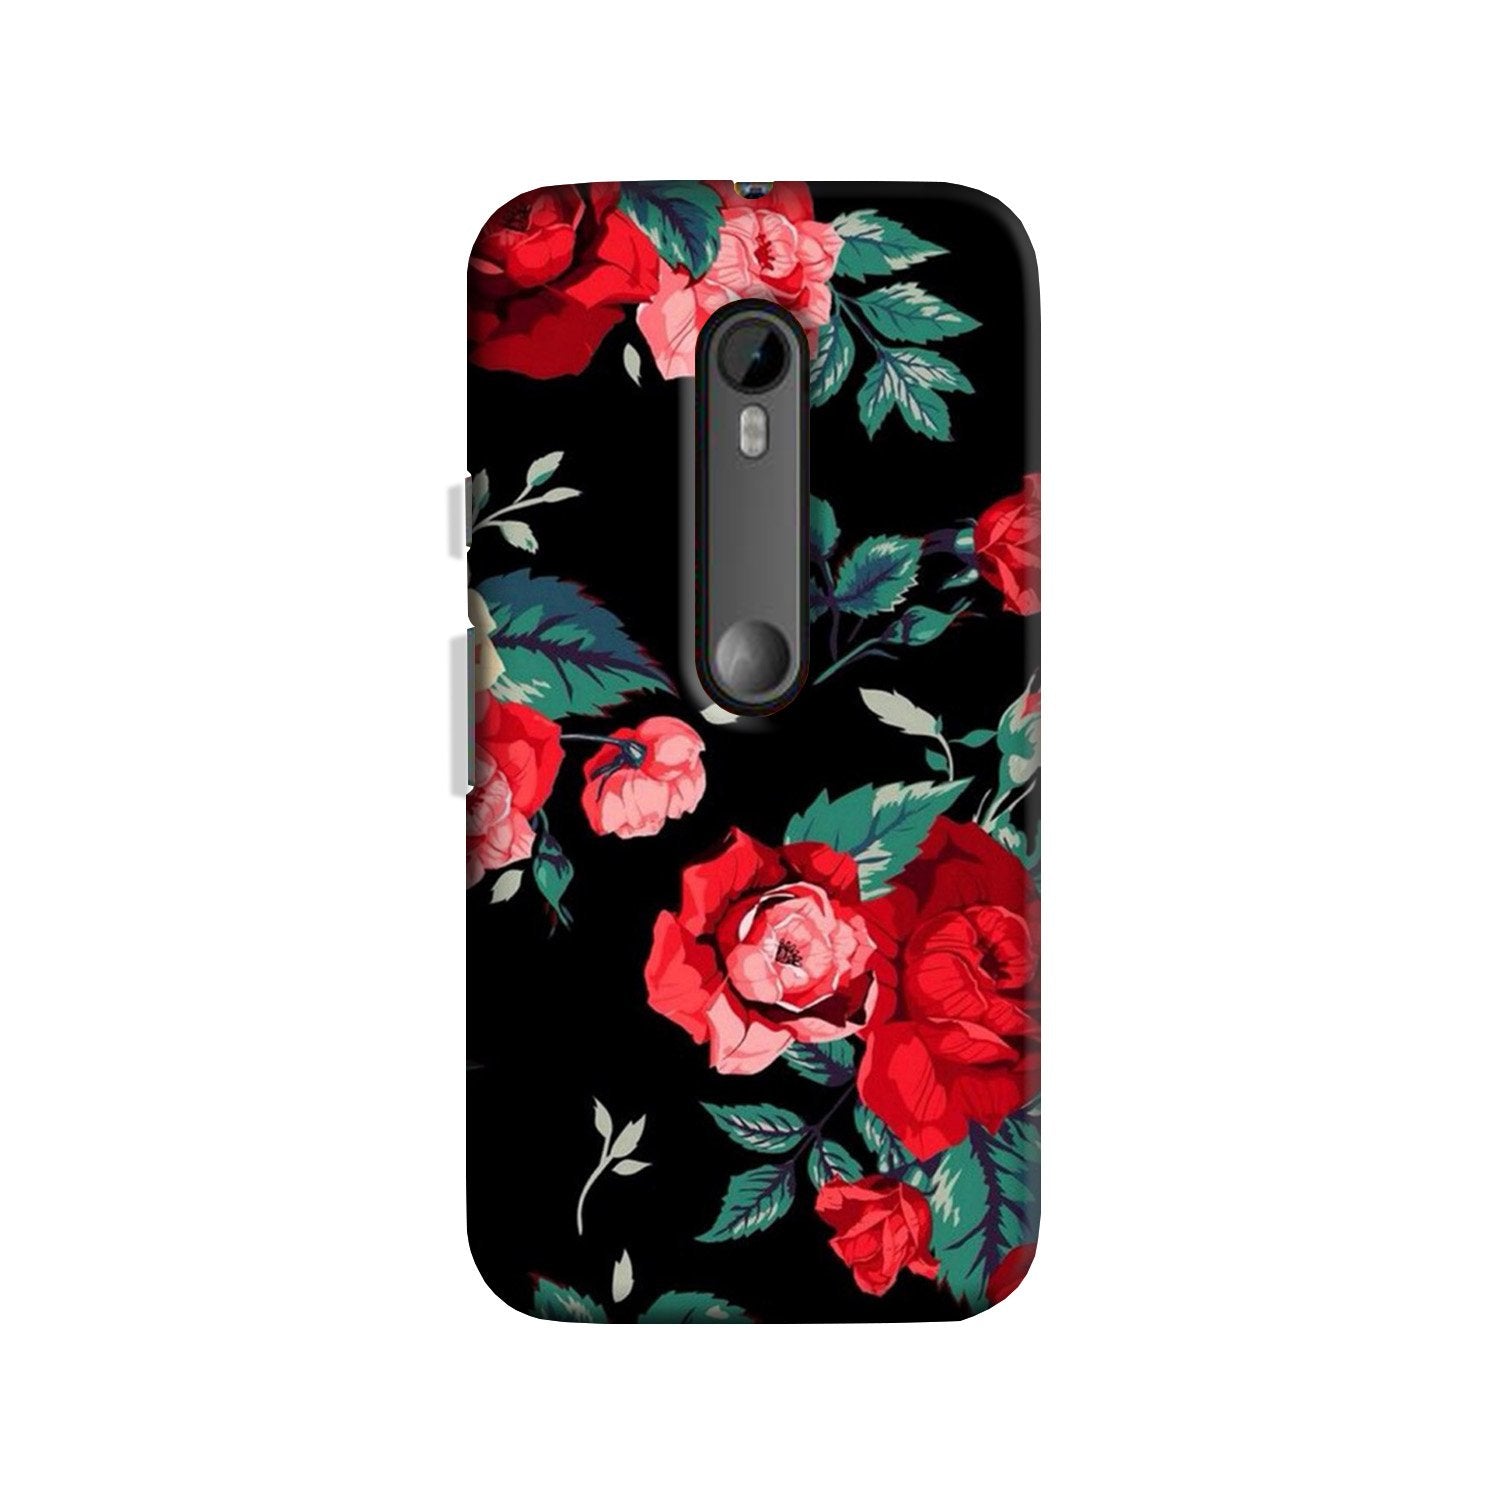 Red Rose2 Case for Moto X Force